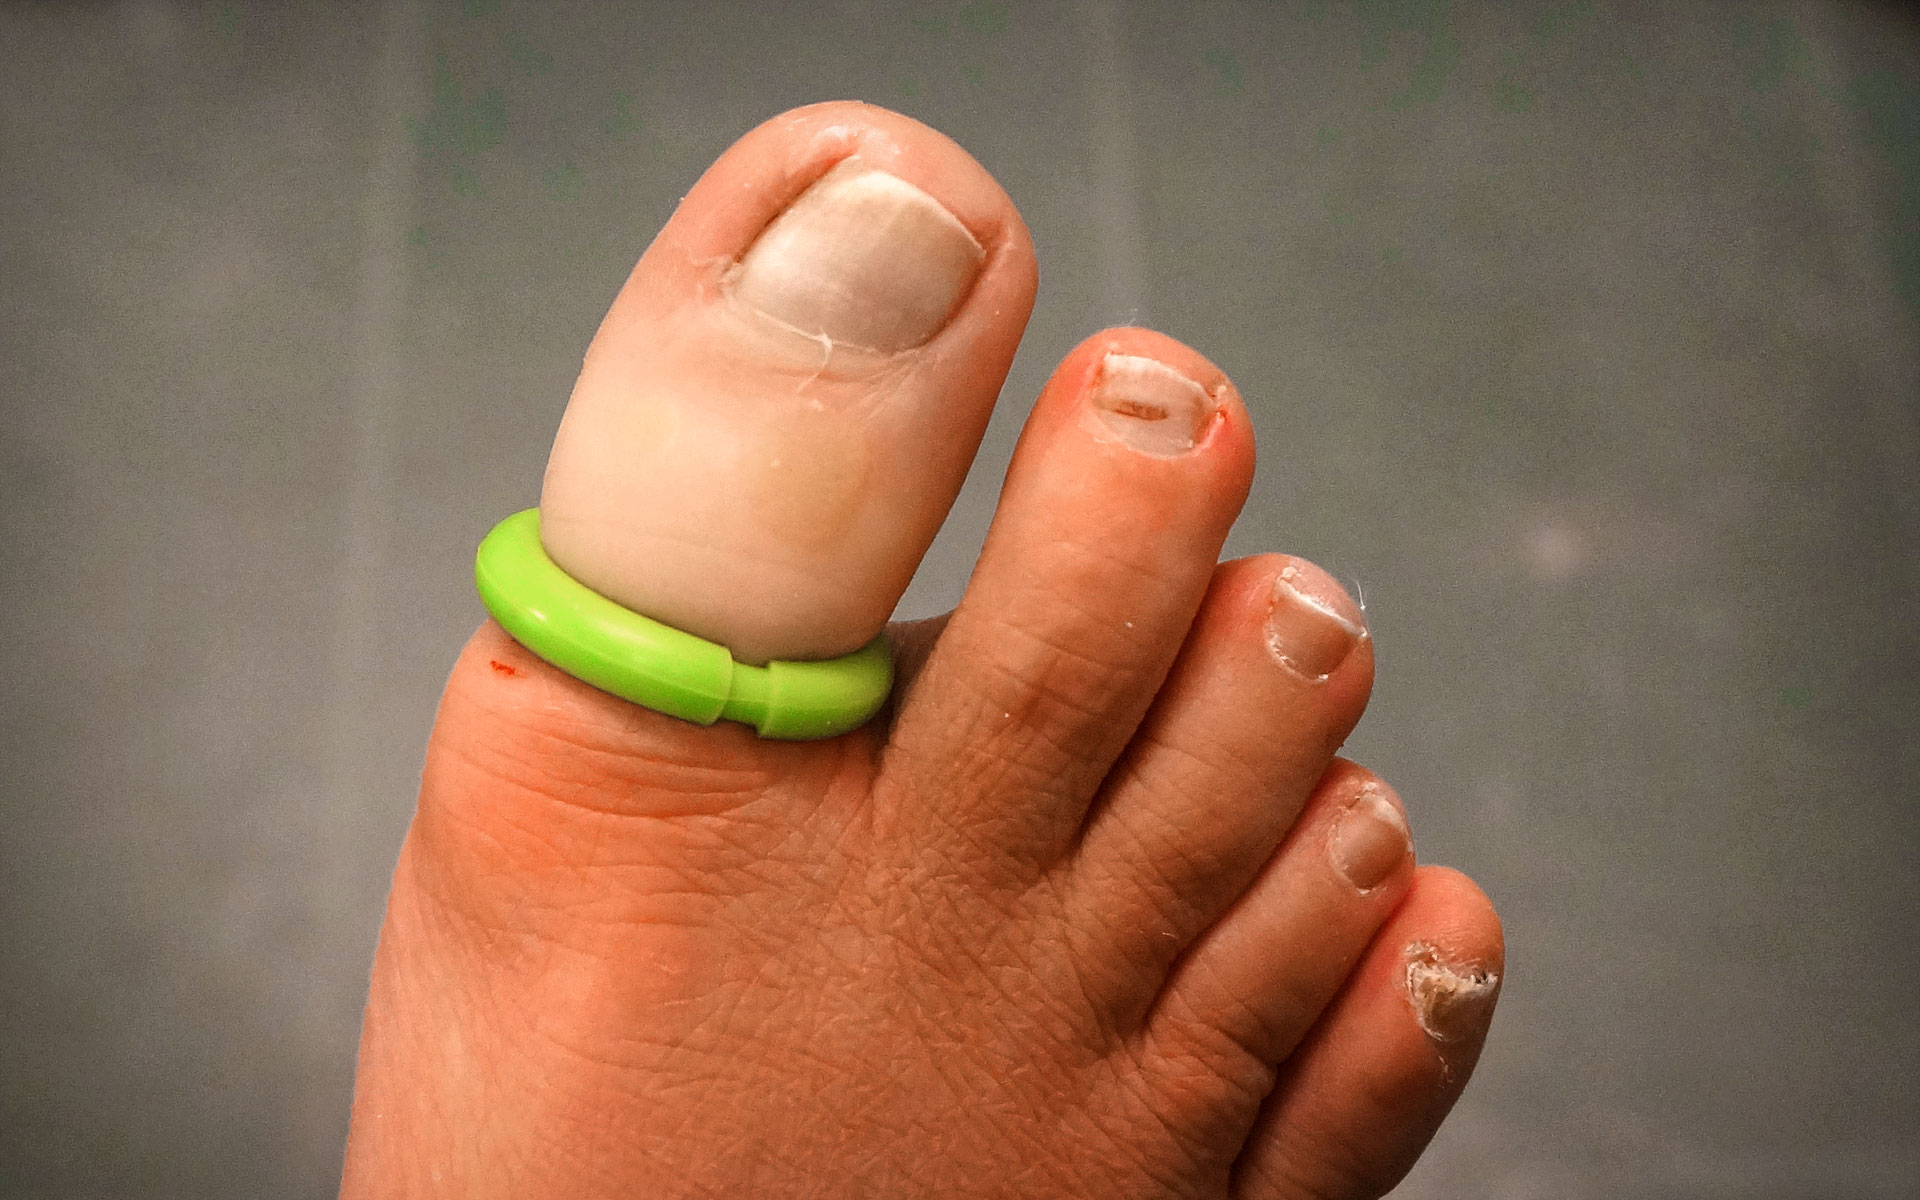 Leaving ingrown toenails untreated can lead to infection. This can escalate the pain and discomfort while also posing a risk to your overall health.